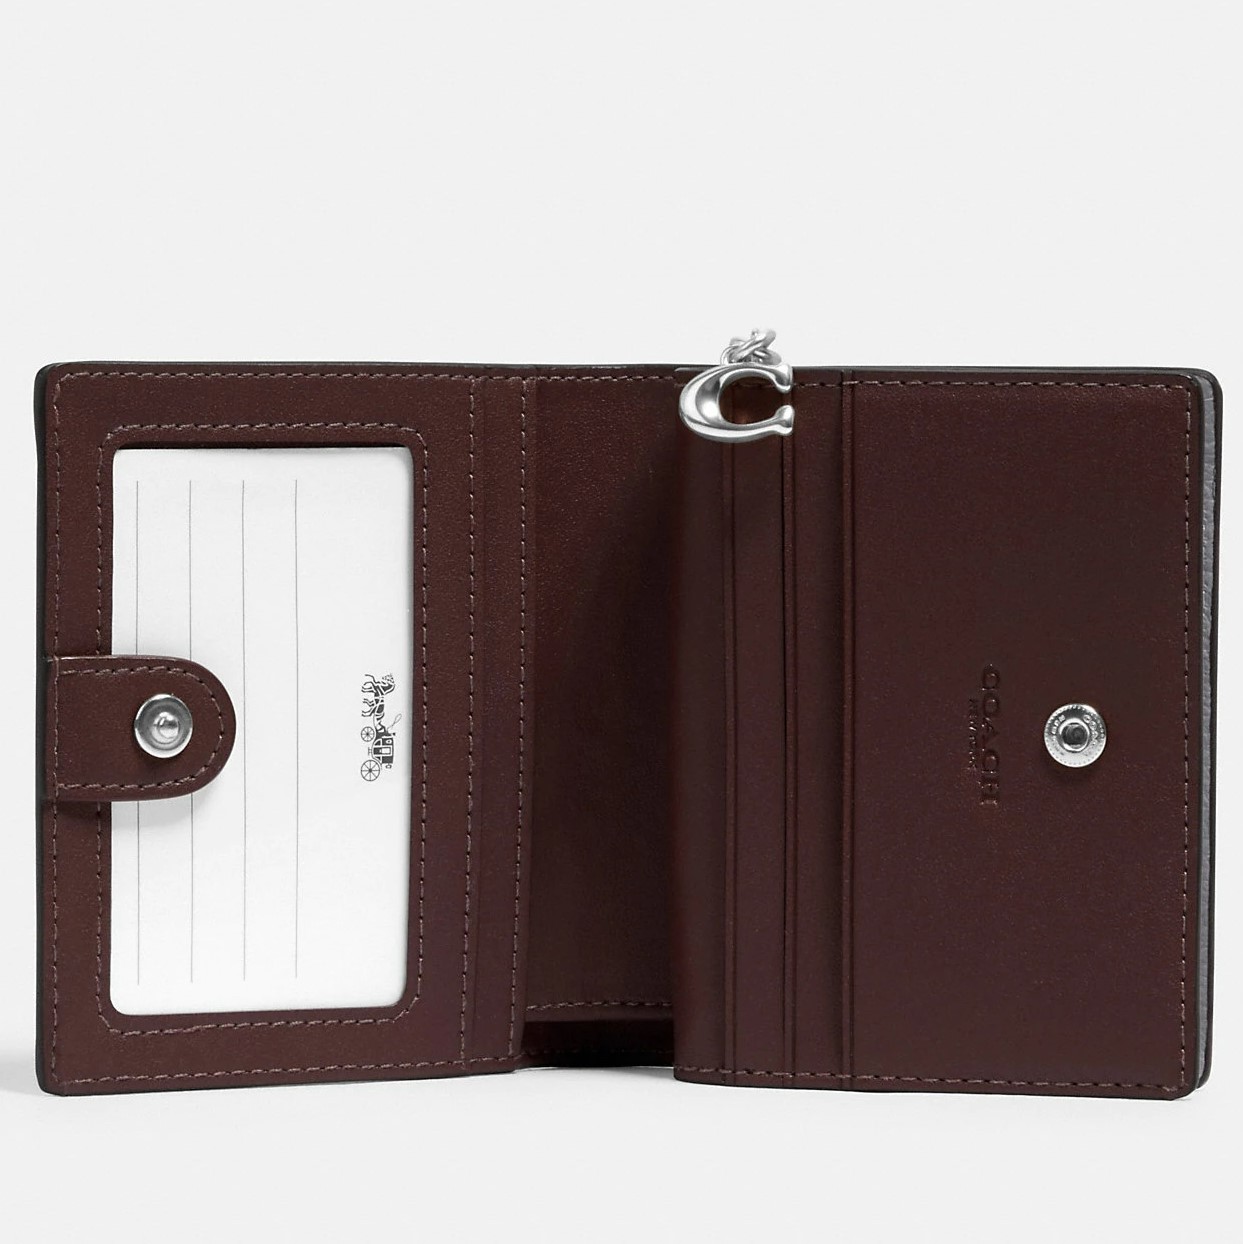 VÍ NGẮN COACH SMALL WALLET PEBBLE LEATHER SNAP WALLET 21